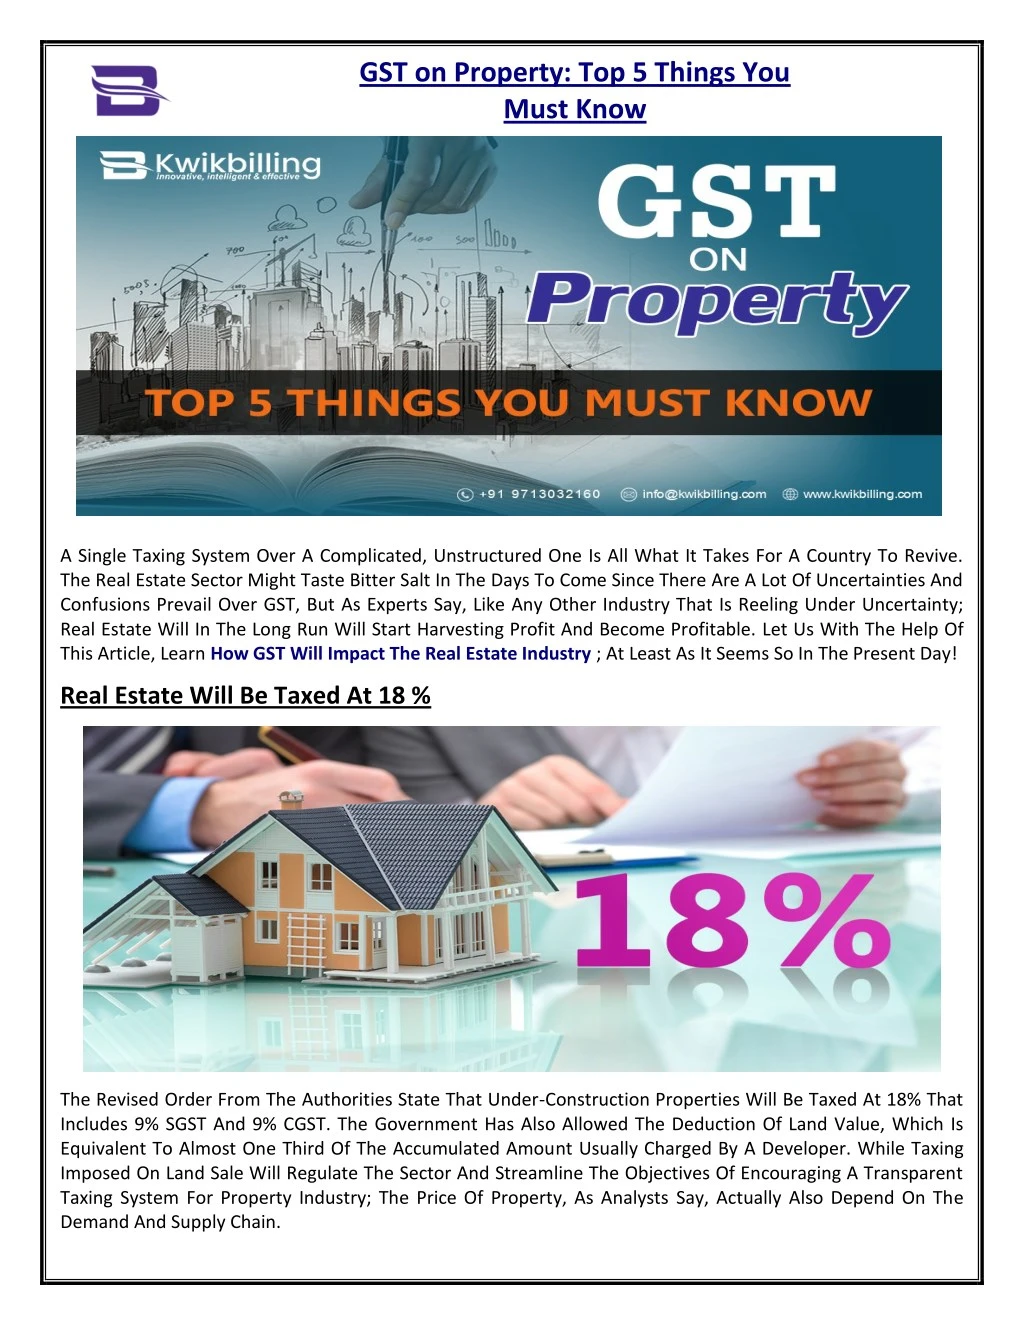 gst on property top 5 things you must know